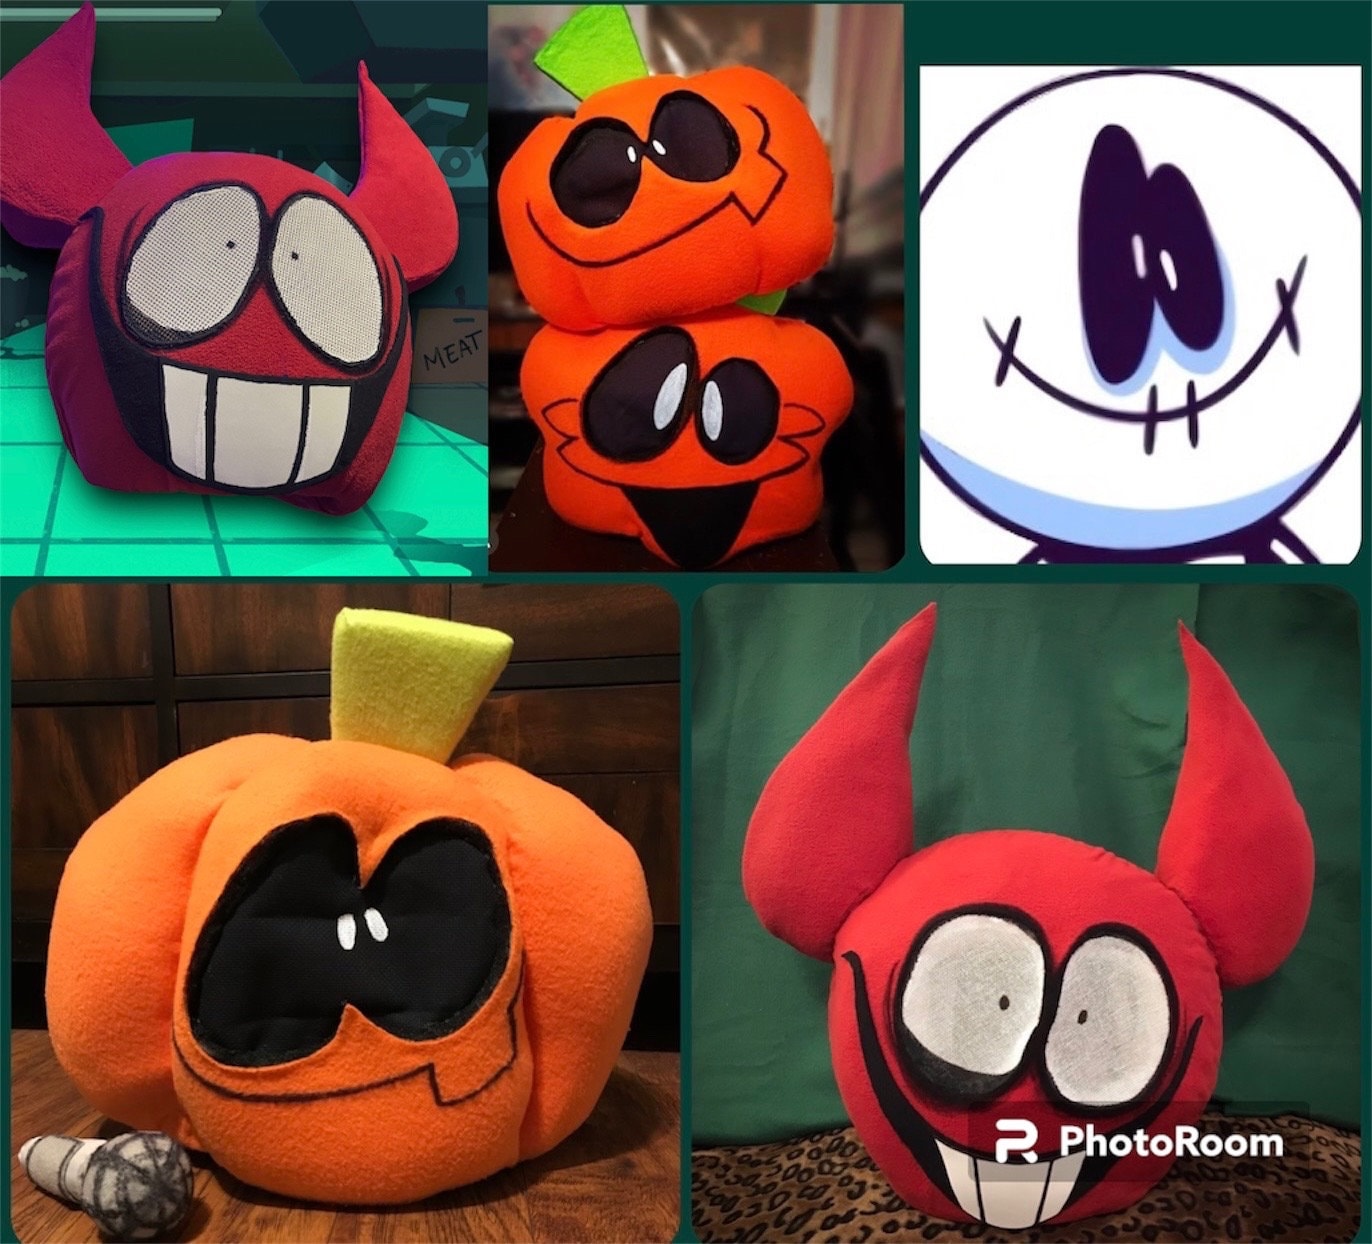 Custom Plush Just Like Bob Velseb From Its Spooky Month -  Norway